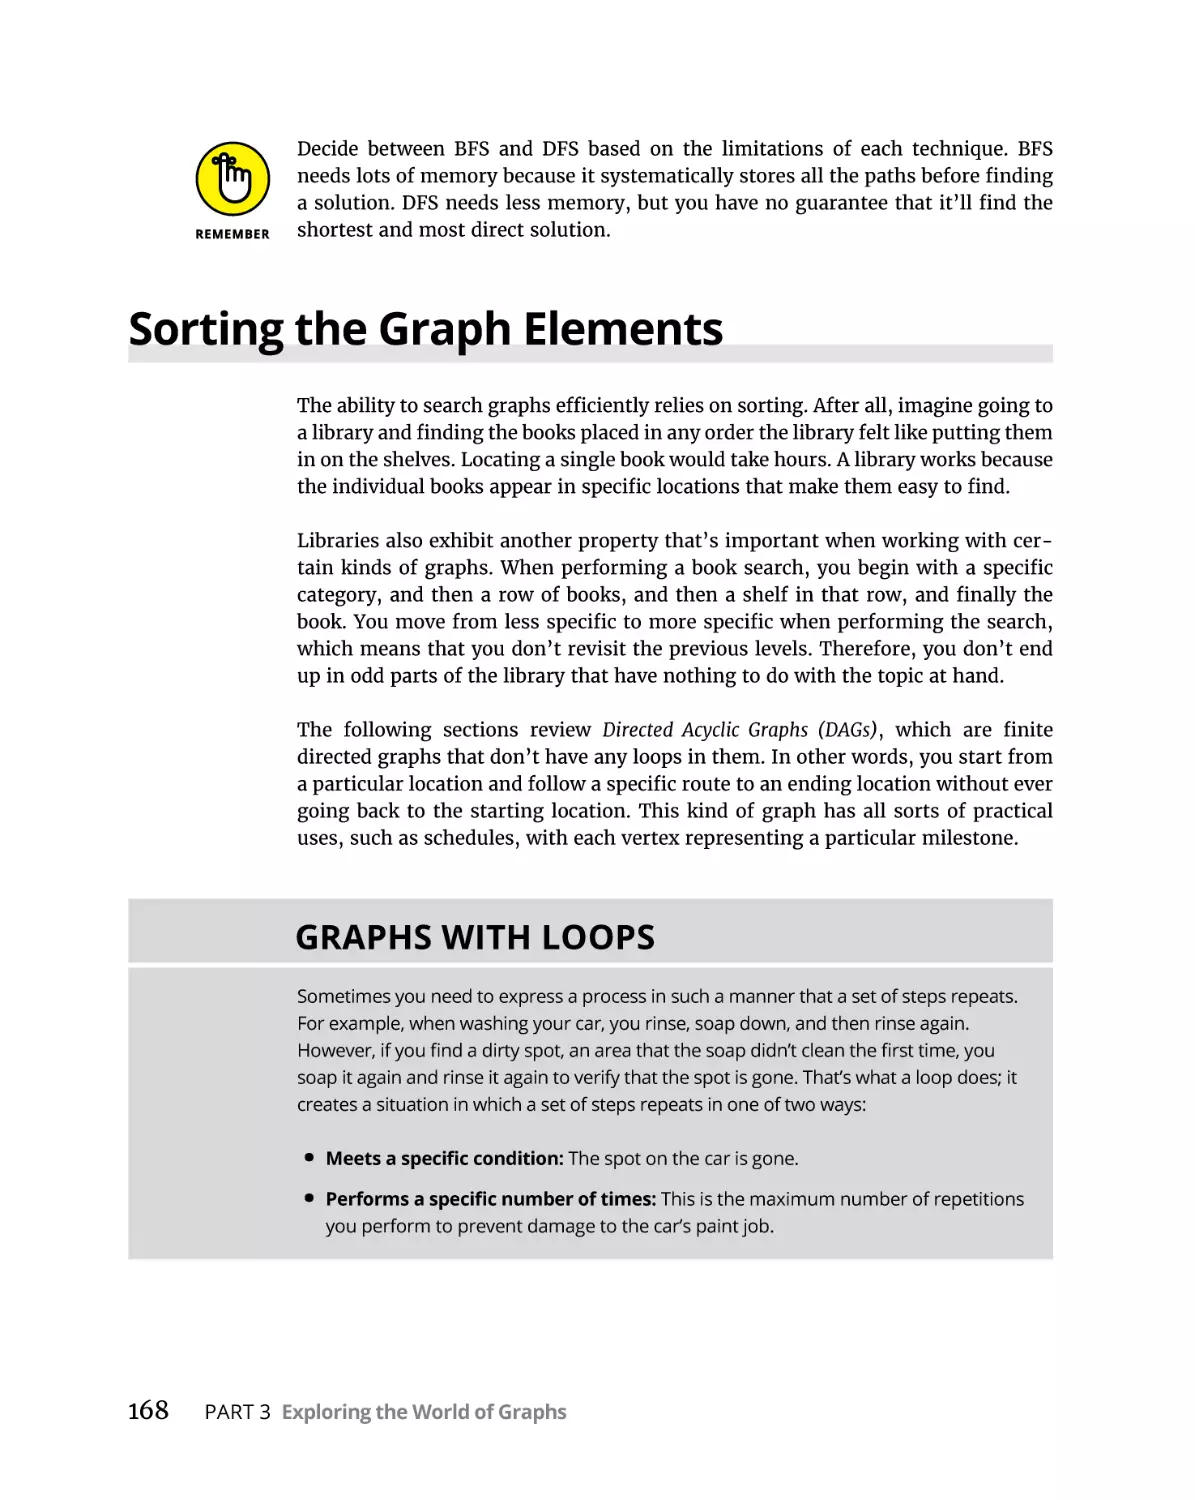 Sorting the Graph Elements